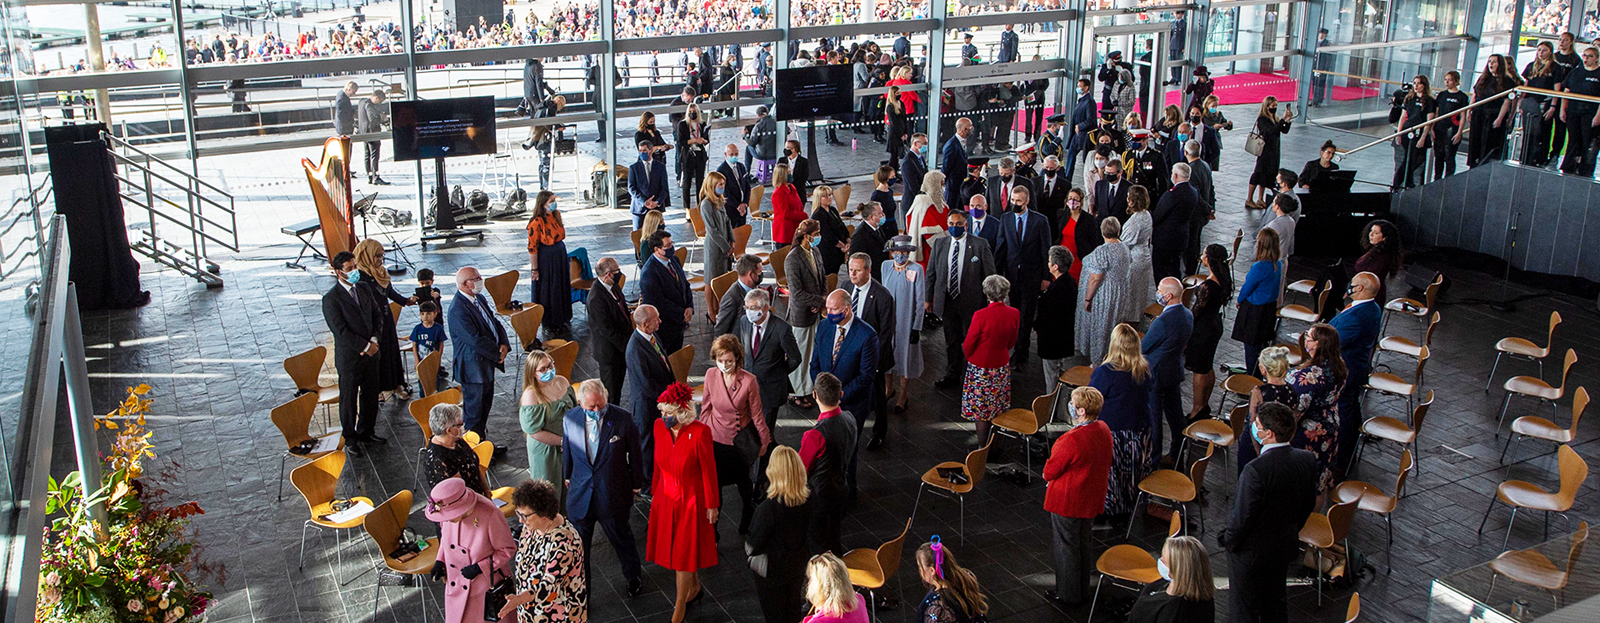 A crowd of people gathered in the Senedd for the Official Opening